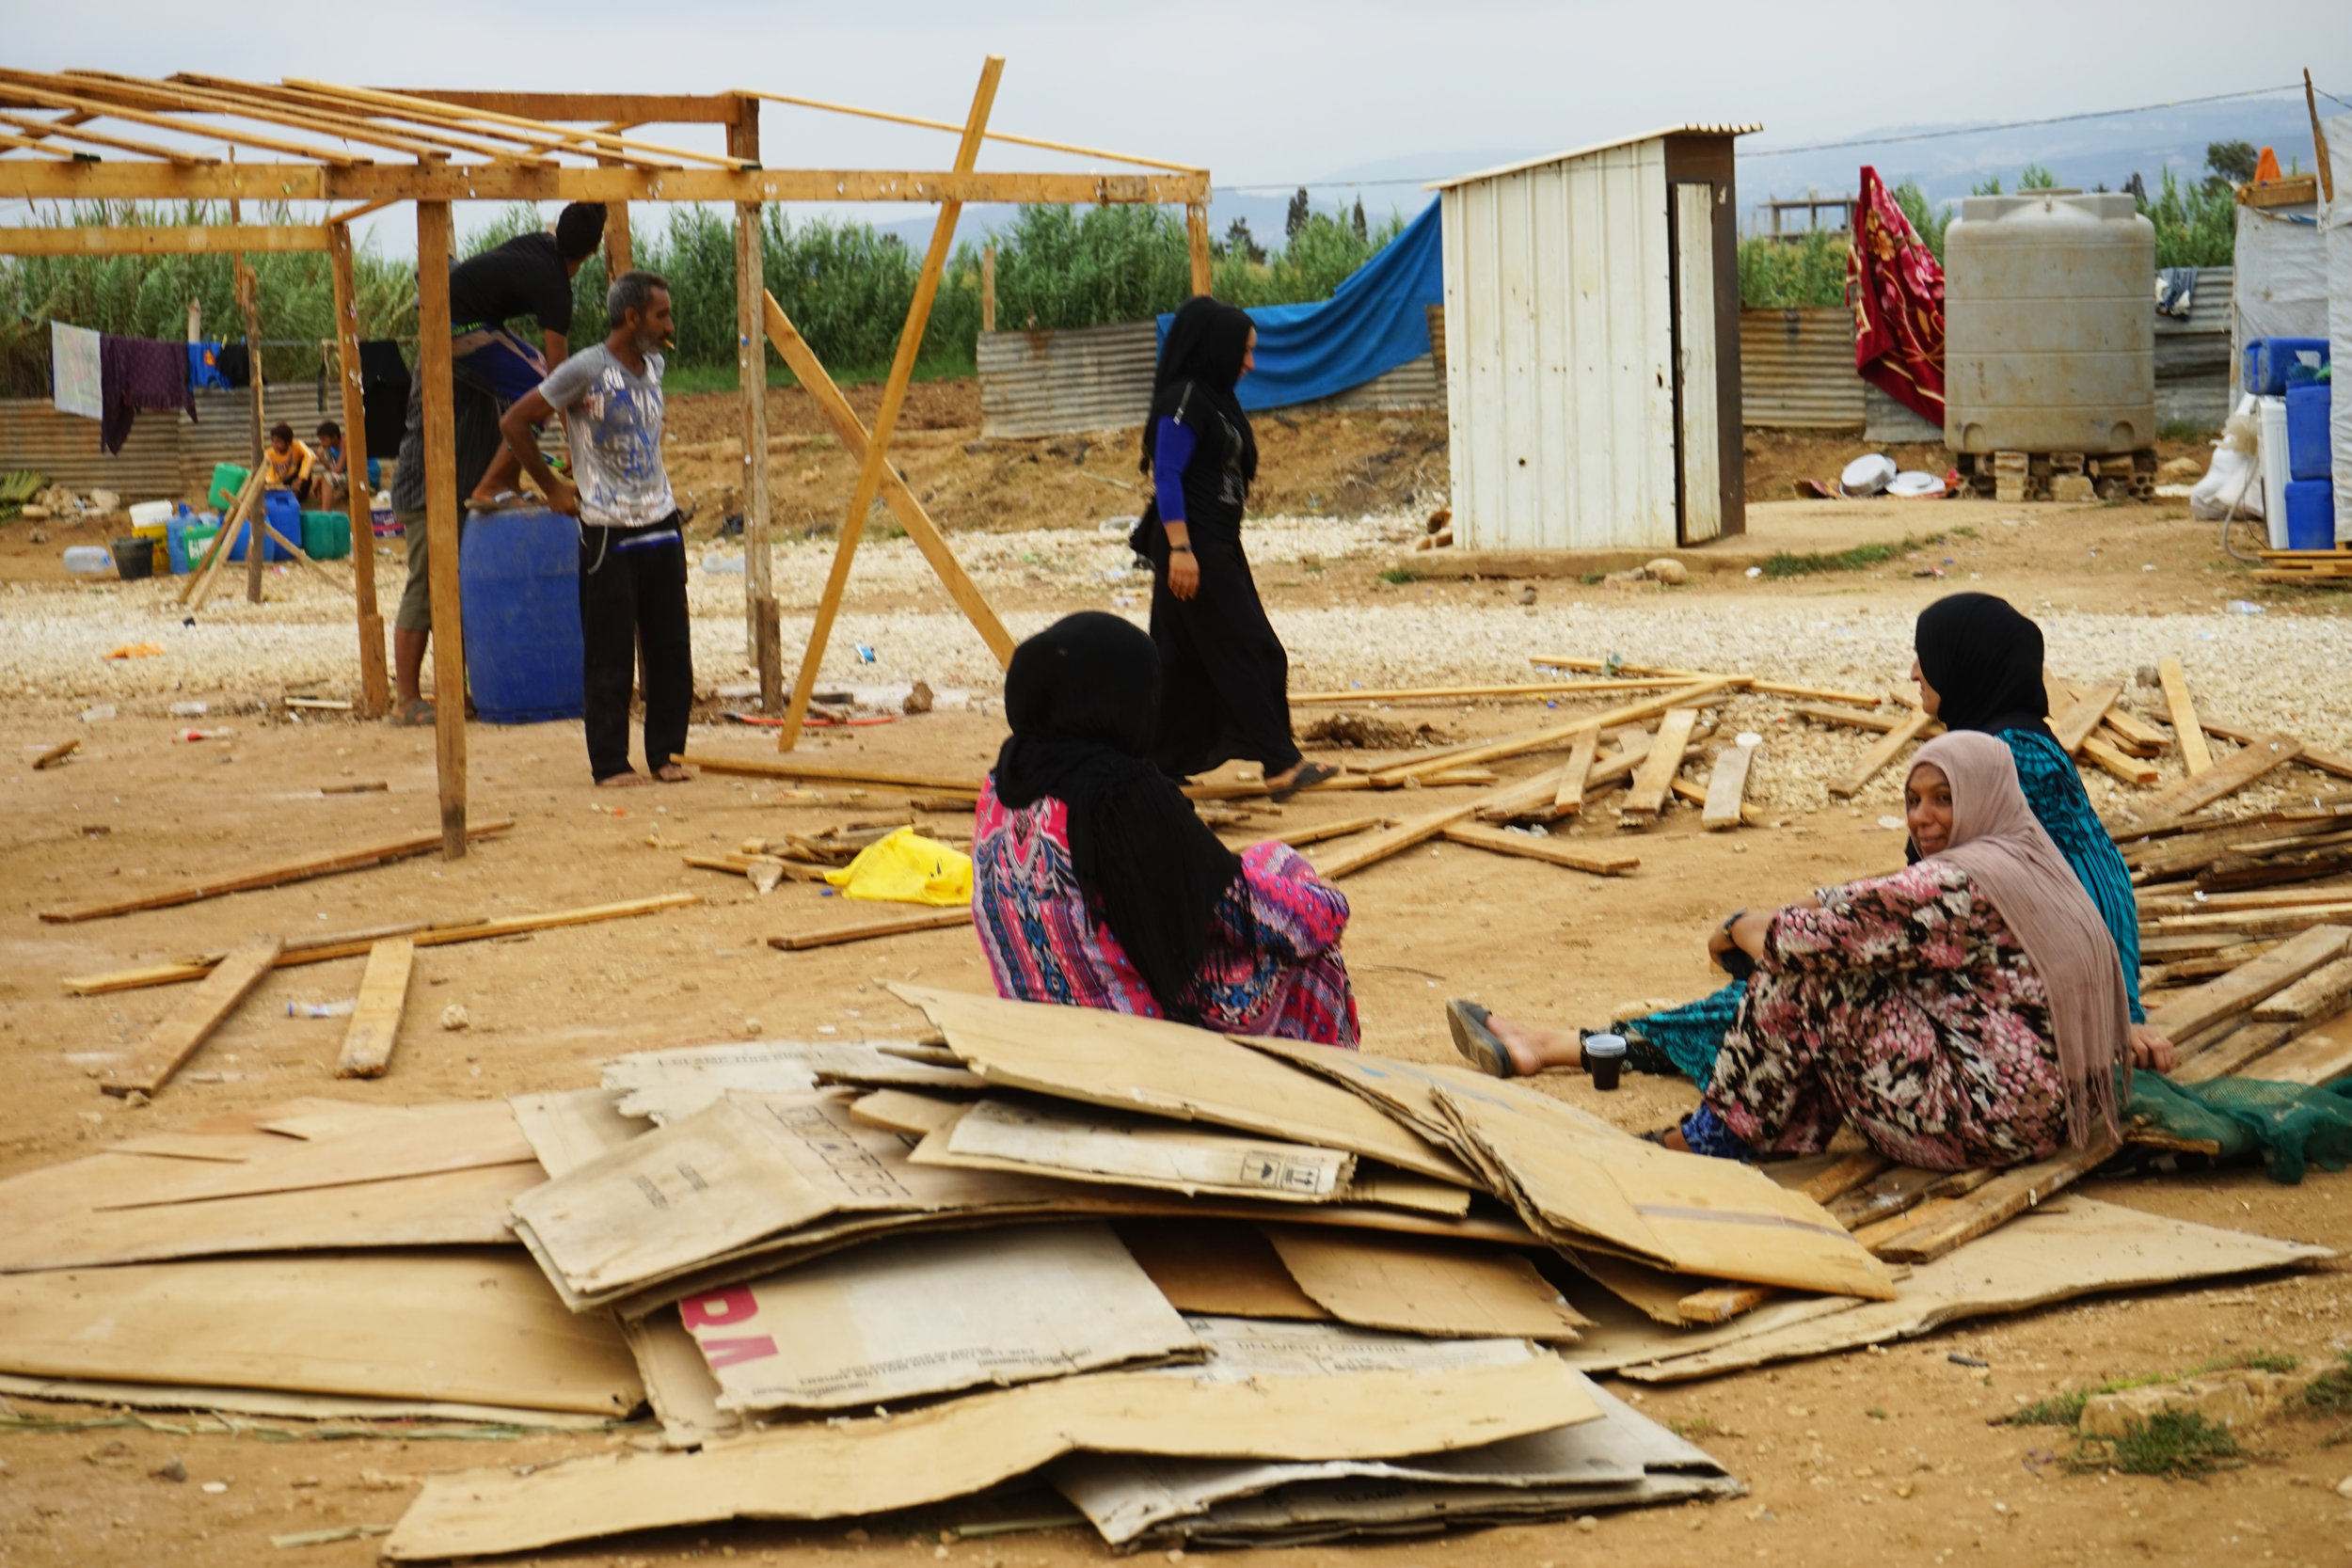  Syrian refugees sit around the construction of a tent structure in UNHCR Syrian refugee camp 054 in 'Akkar on August 24, 2016. 